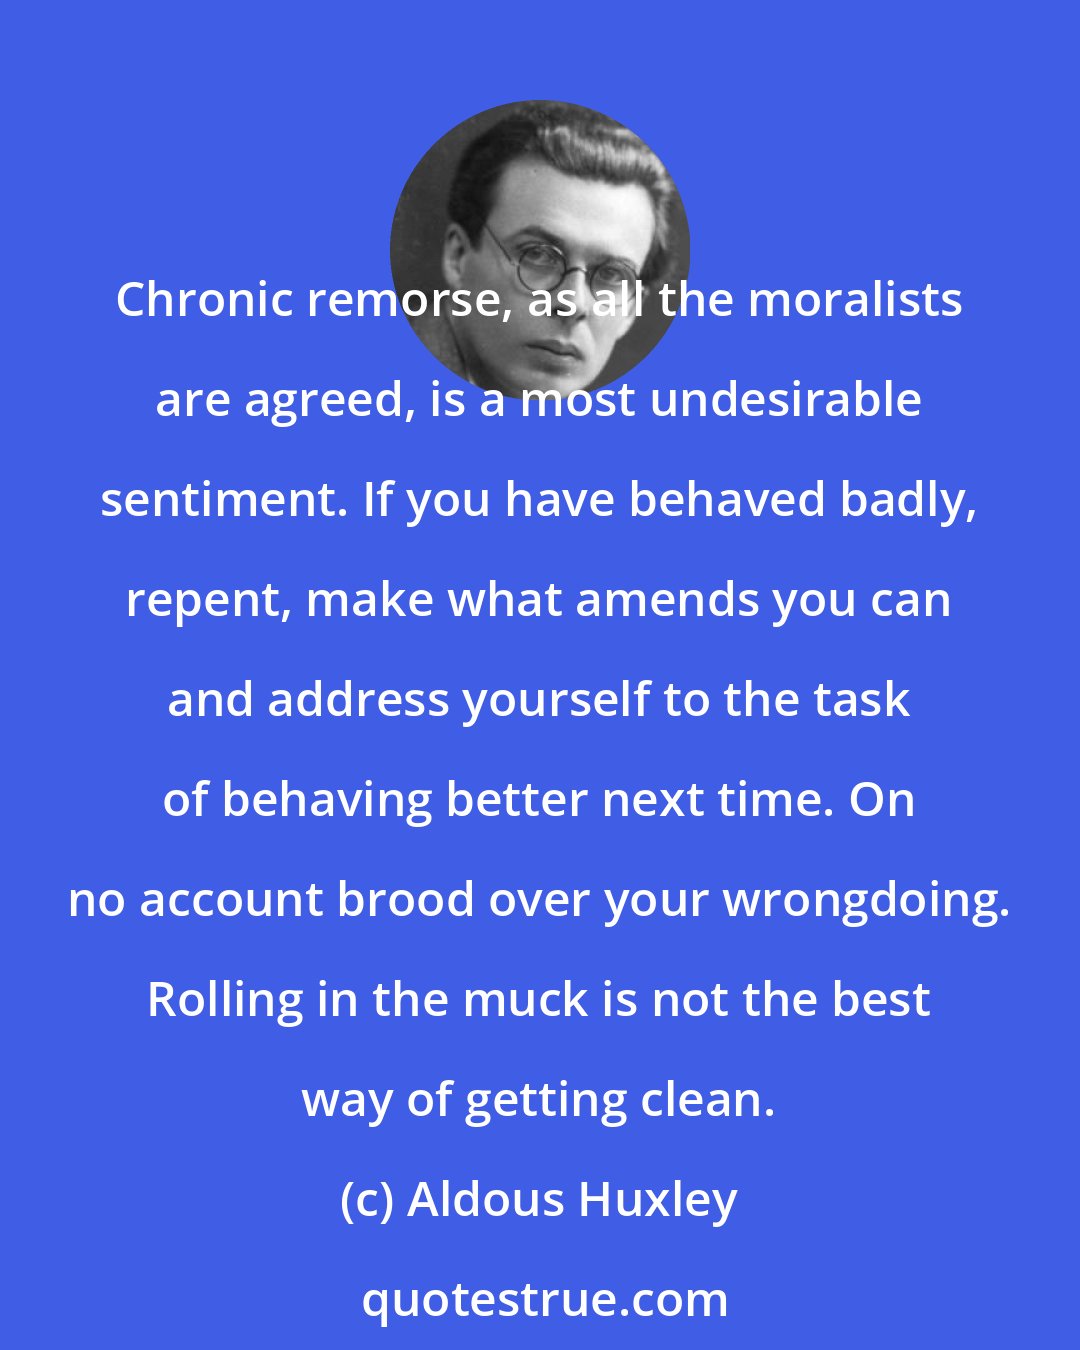 Aldous Huxley: Chronic remorse, as all the moralists are agreed, is a most undesirable sentiment. If you have behaved badly, repent, make what amends you can and address yourself to the task of behaving better next time. On no account brood over your wrongdoing. Rolling in the muck is not the best way of getting clean.